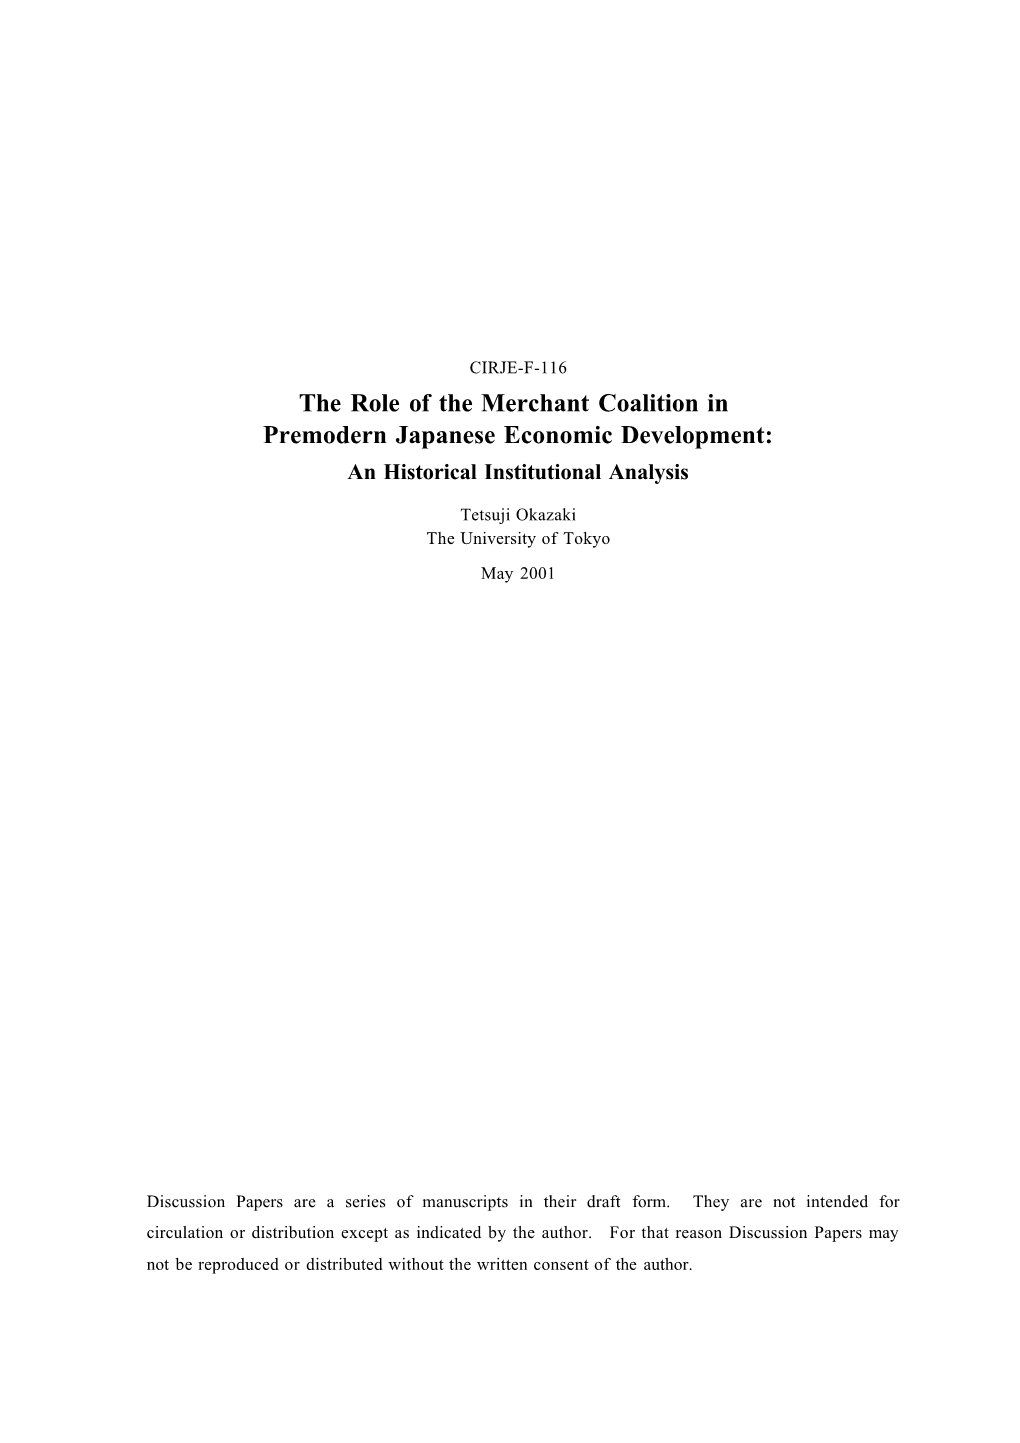 The Role of the Merchant Coalition in Premodern Japanese Economic Development